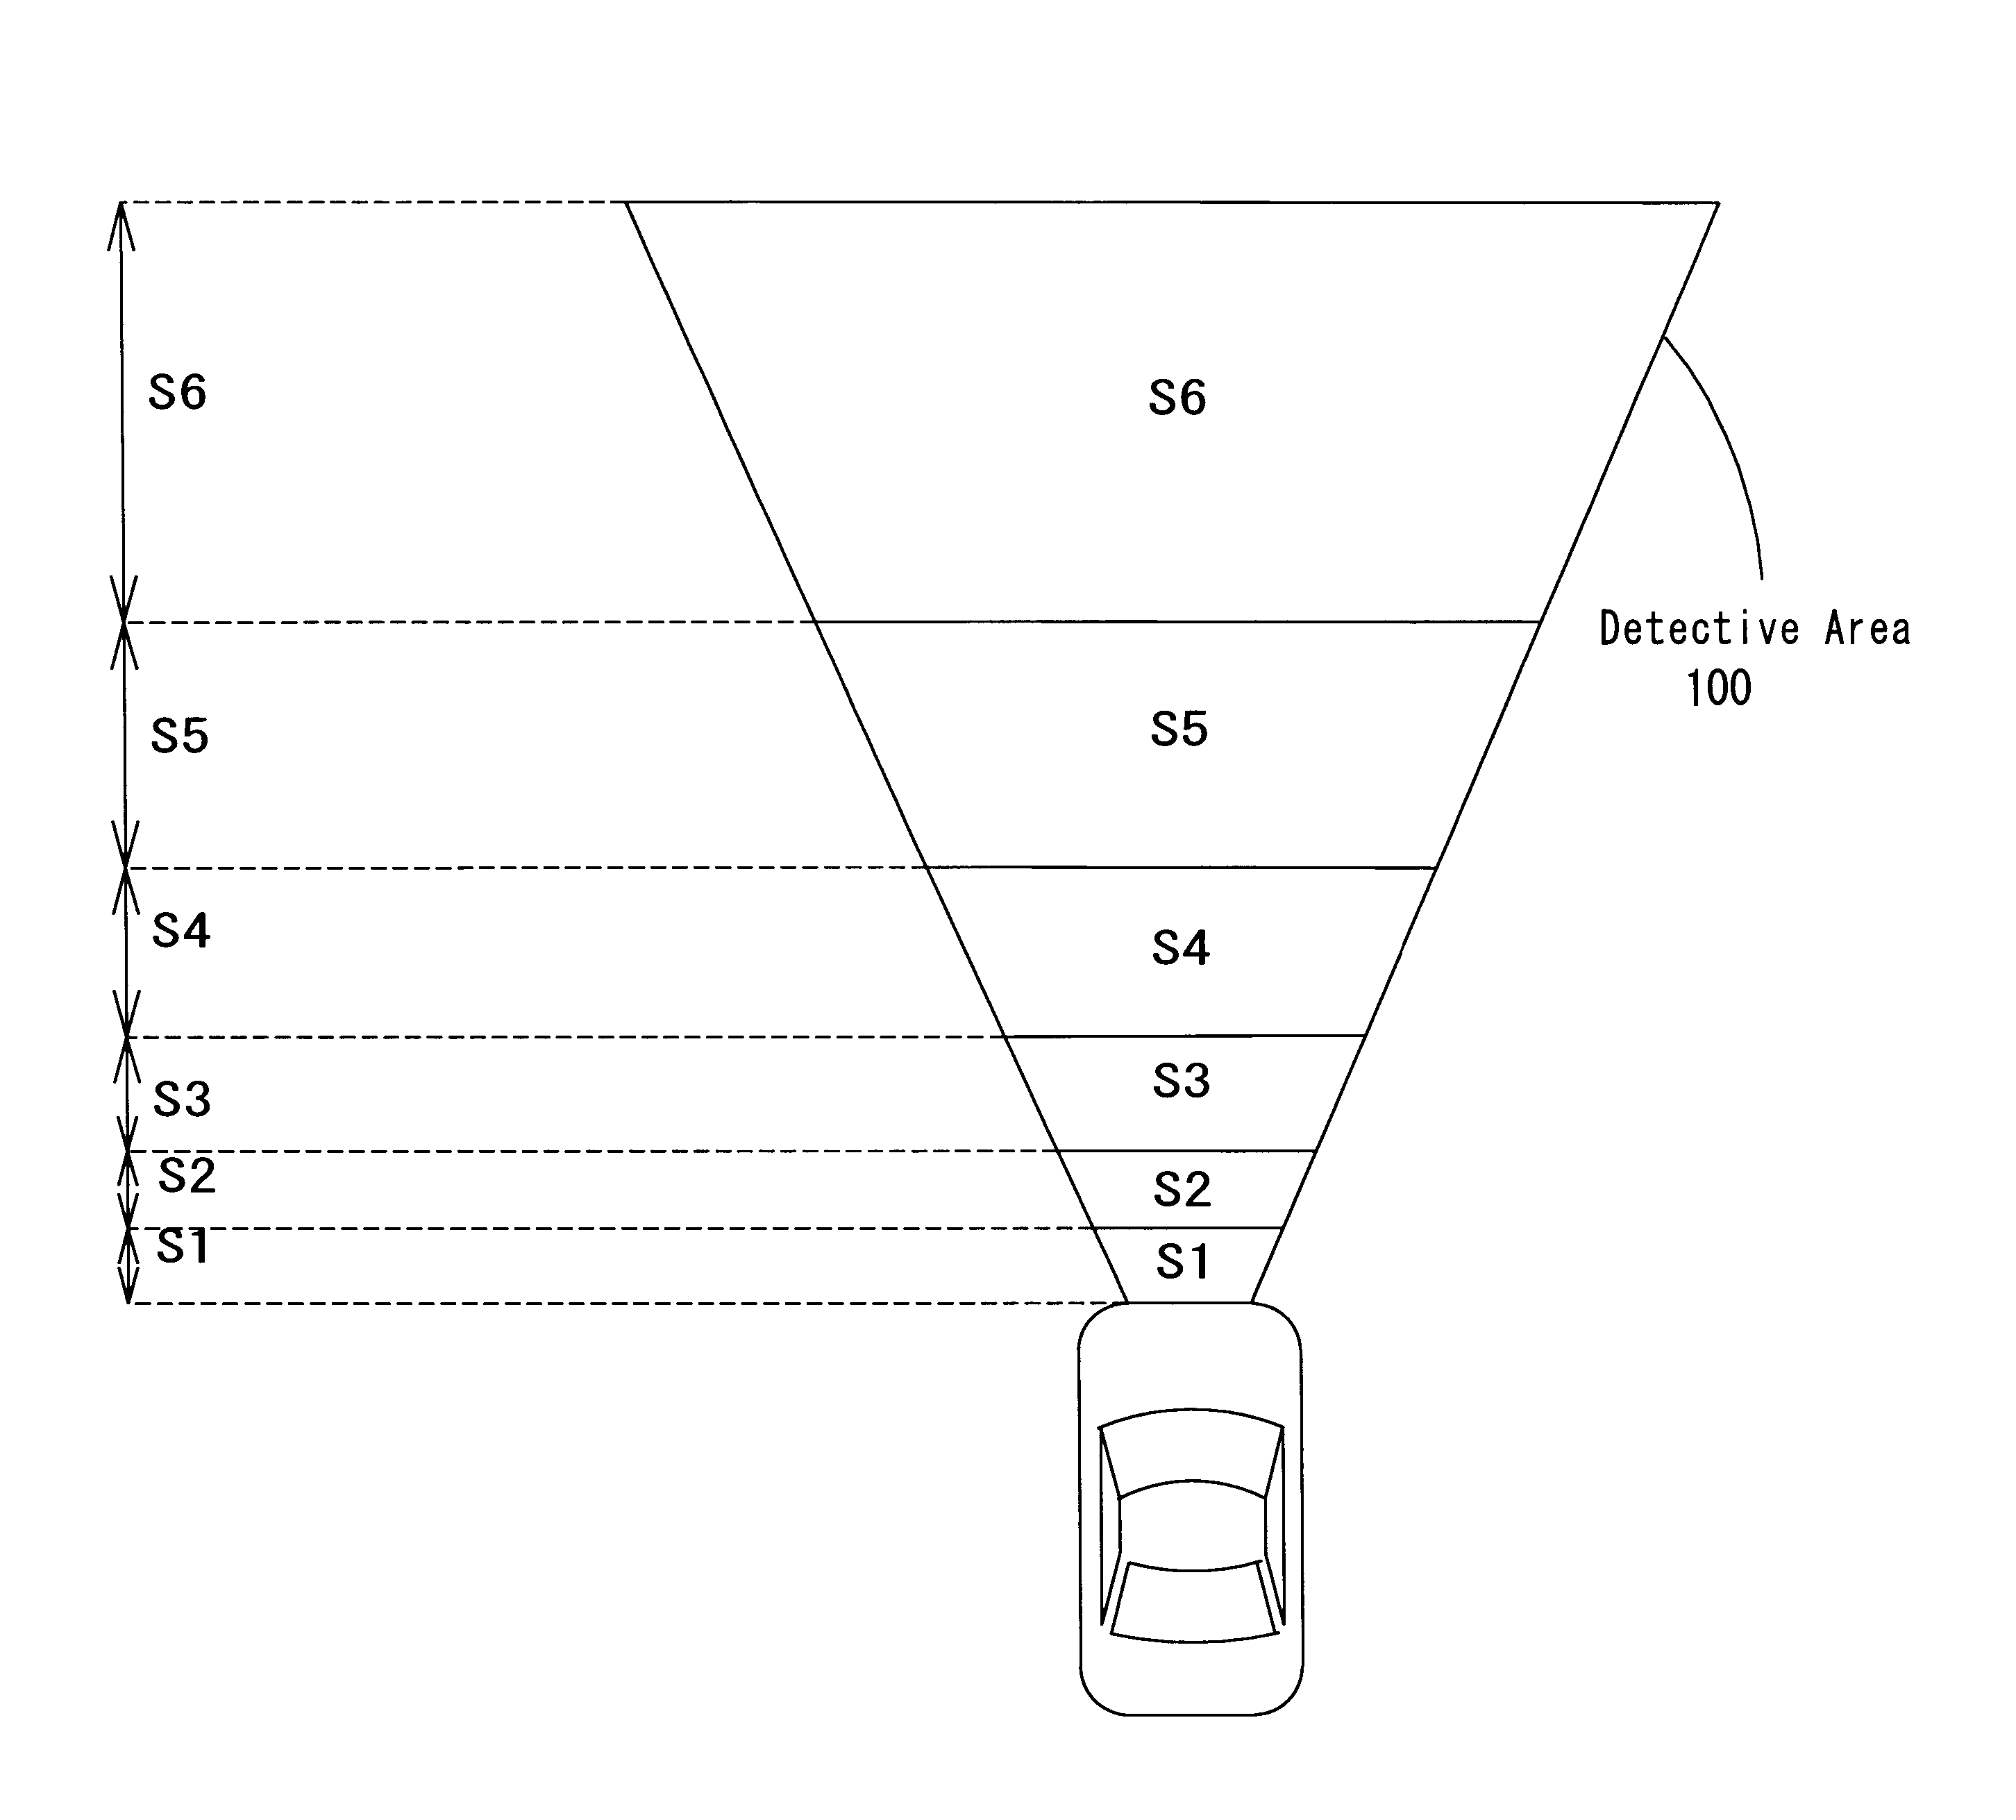 Optical object recognition system